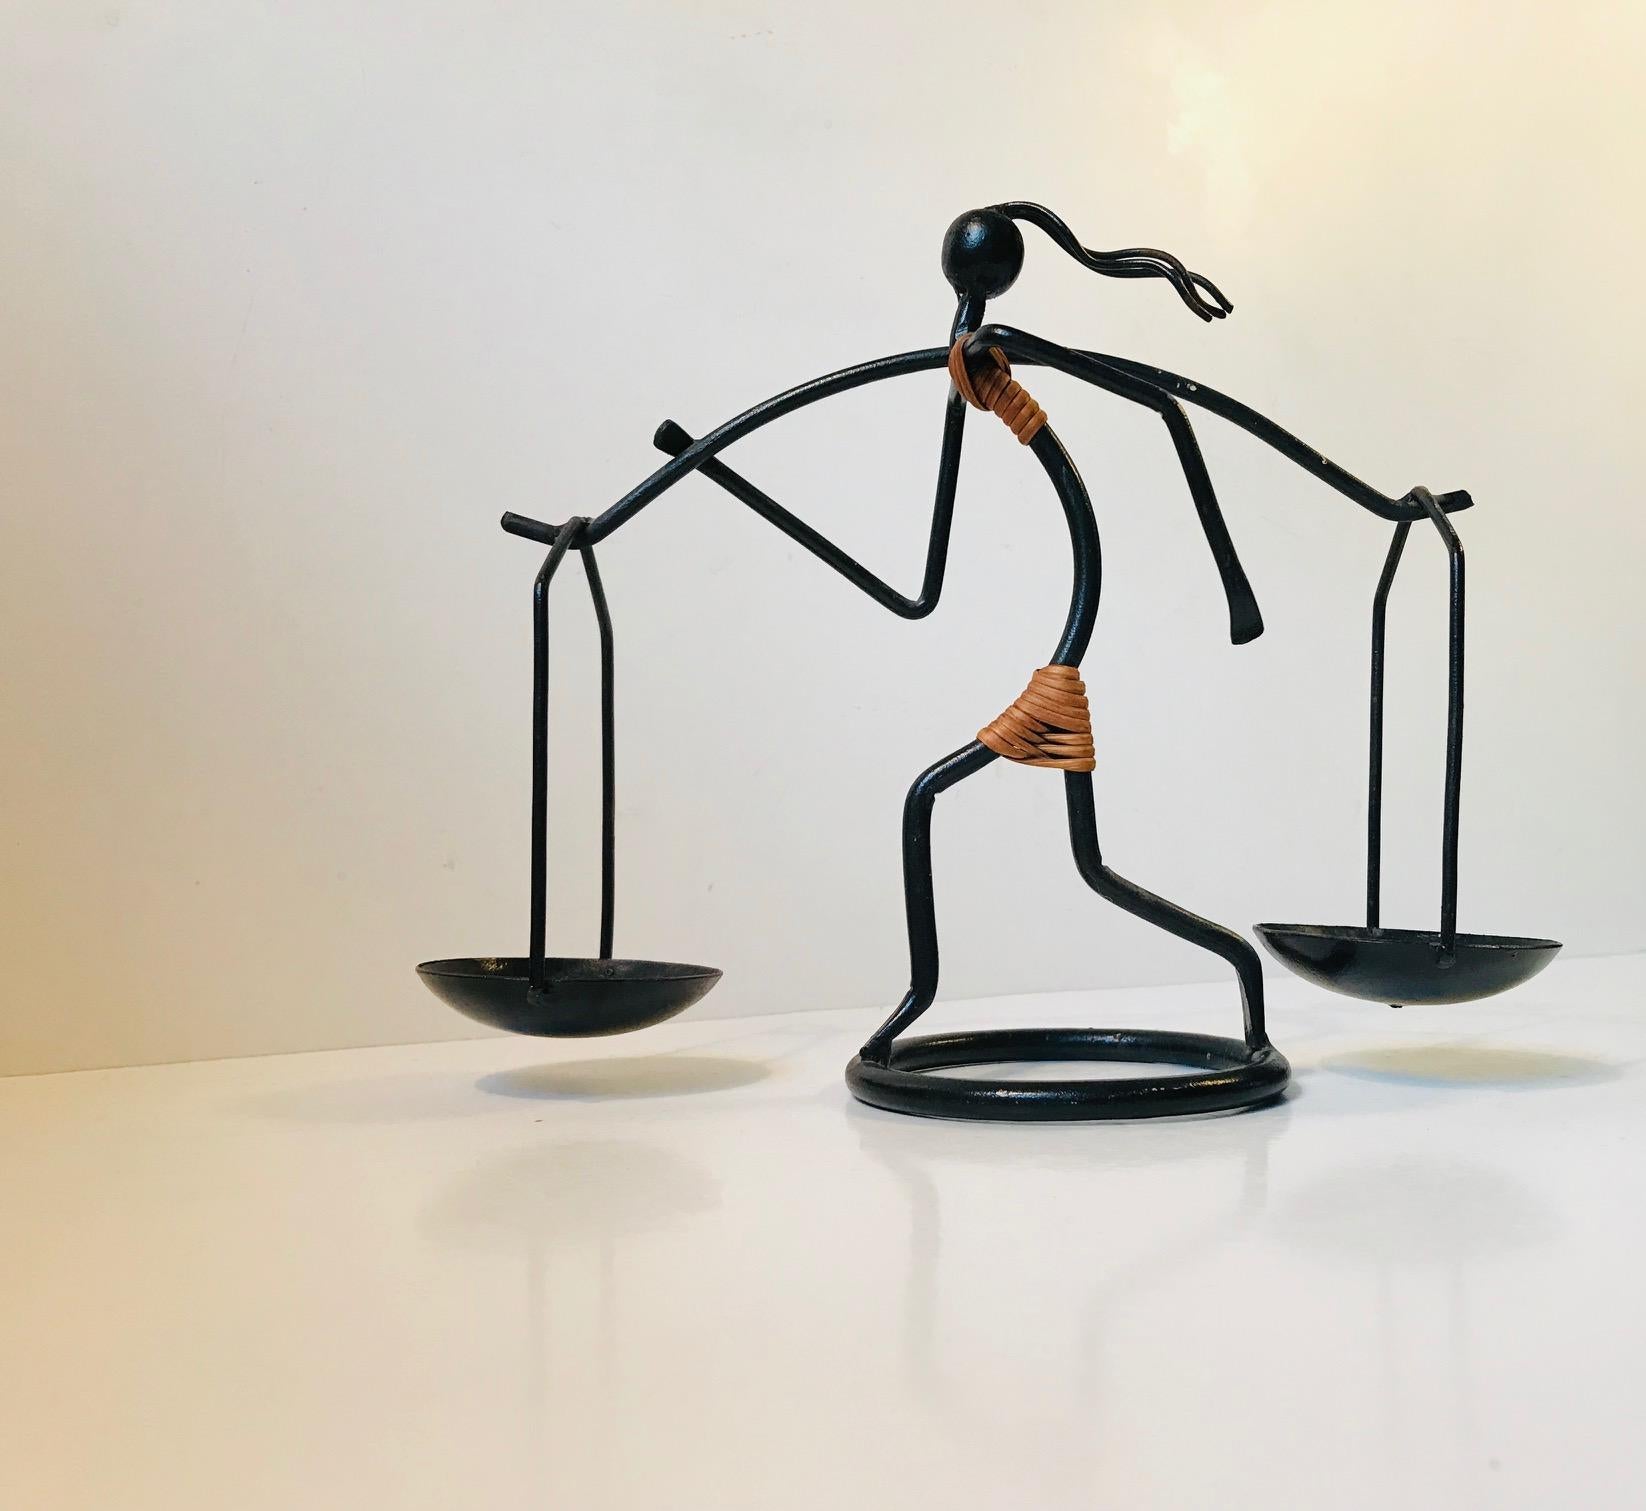 This figurative candleholder for two block or ball candles is made from bend wire-steel with applied rattan detailing. It was designed by Laurids Lønborg and manufactured during the 1960s by LL Design in Denmark.